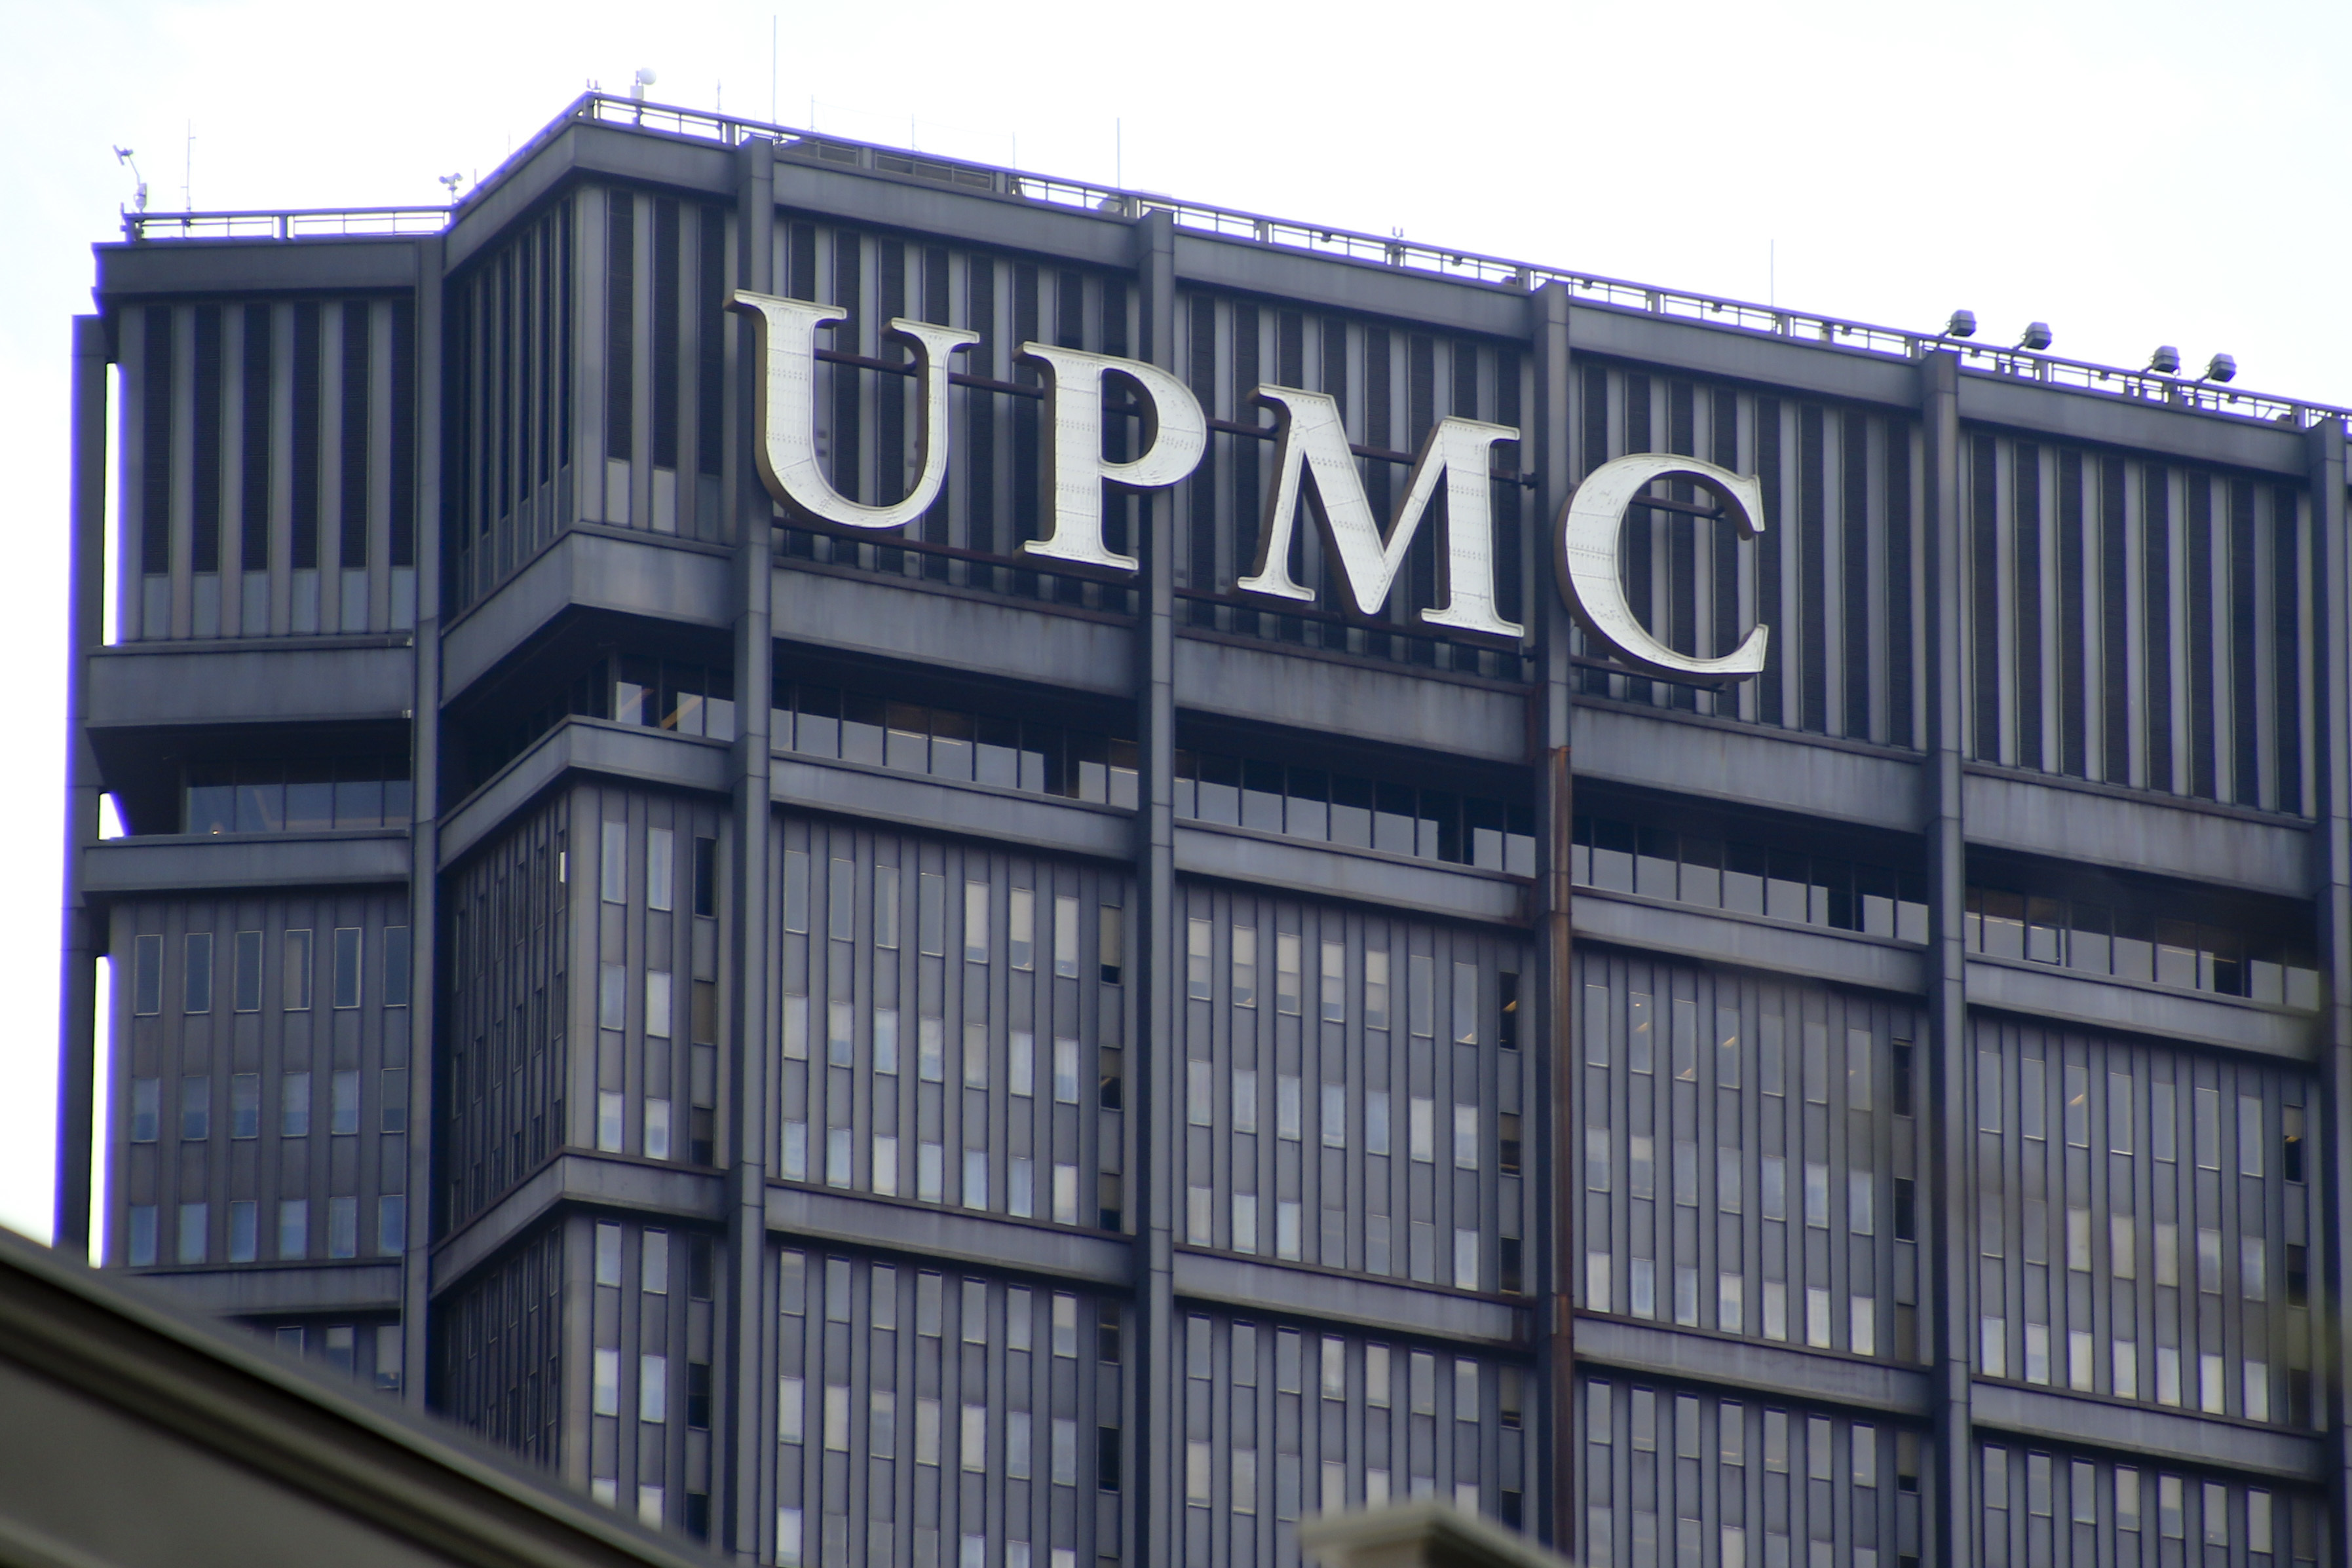 UPMC reaches 23B in annual revenue thanks to increases from UPMC